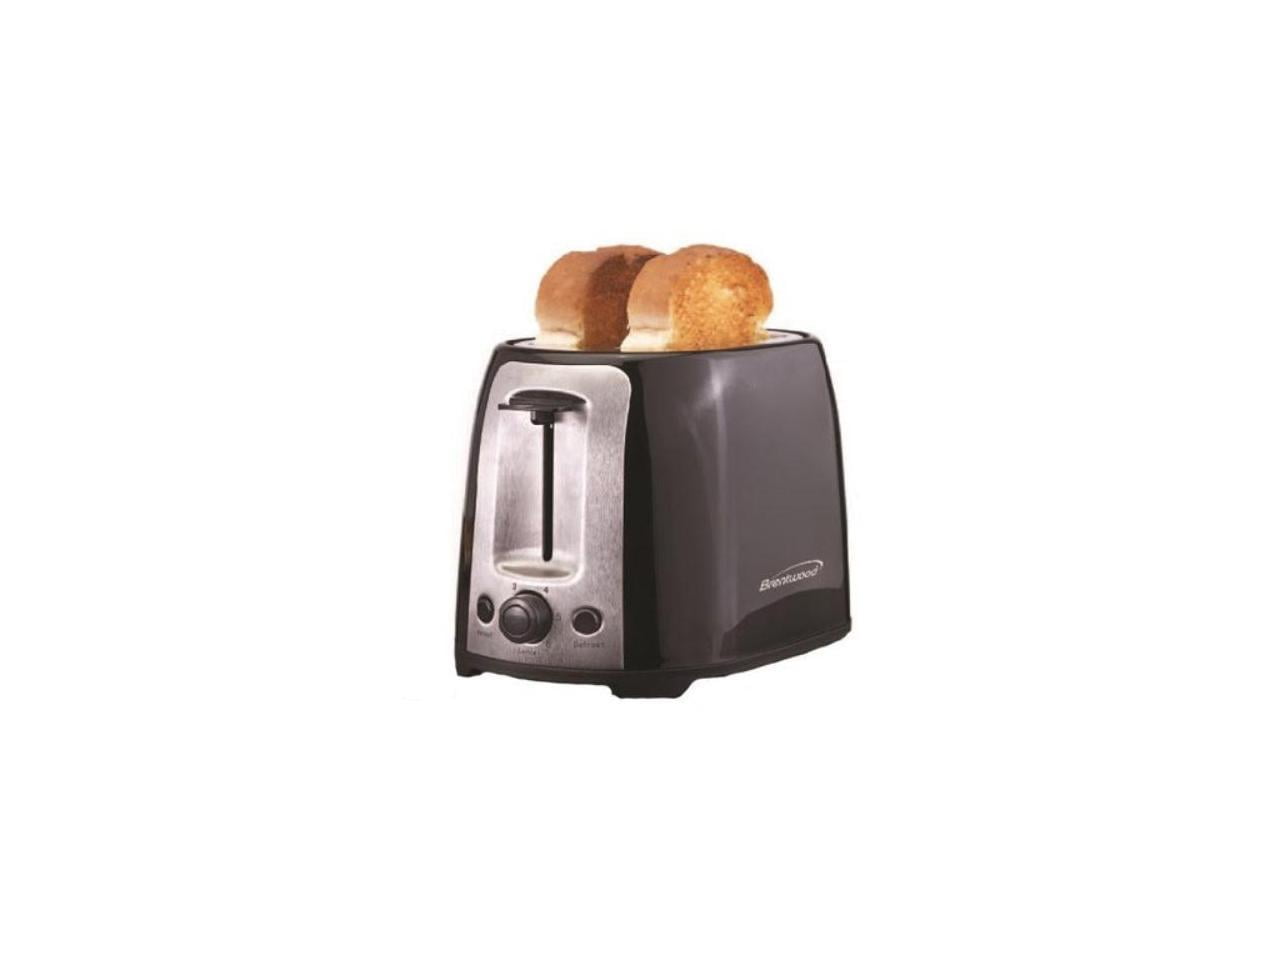  Black+Decker Honeycomb Collection 4-Slice Toaster with Premium  Textured Finish, TR1450WD, White: Home & Kitchen